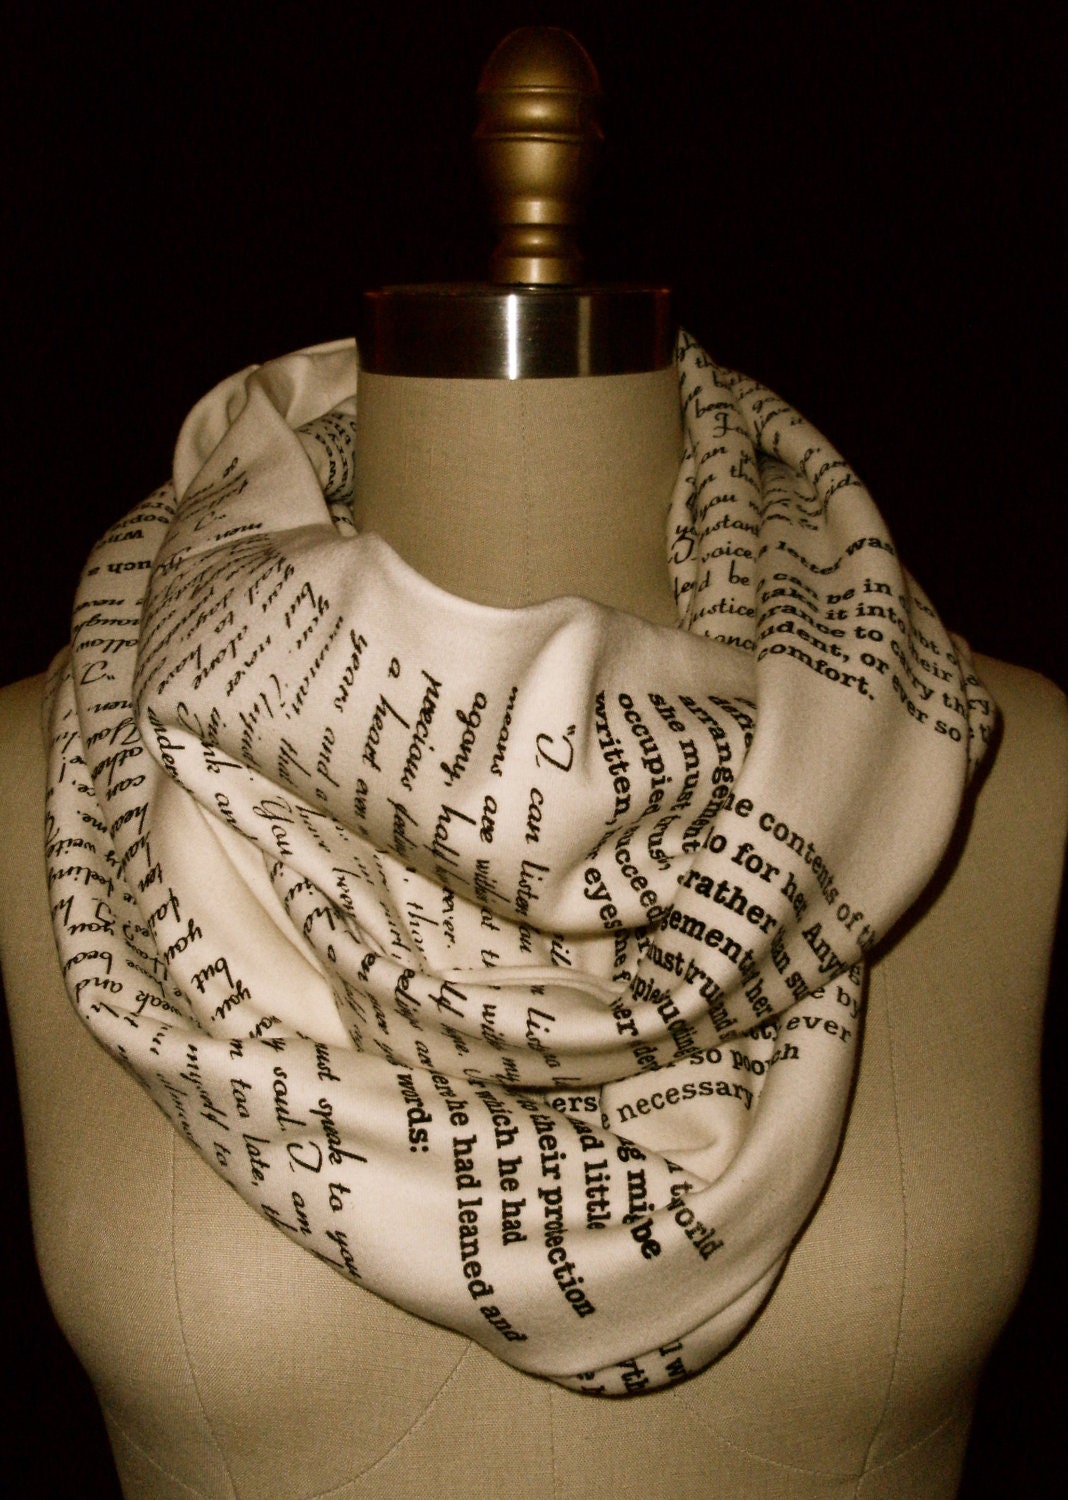 Wrap Up With A Good Book Scarf: Persuasion by Jane Austen